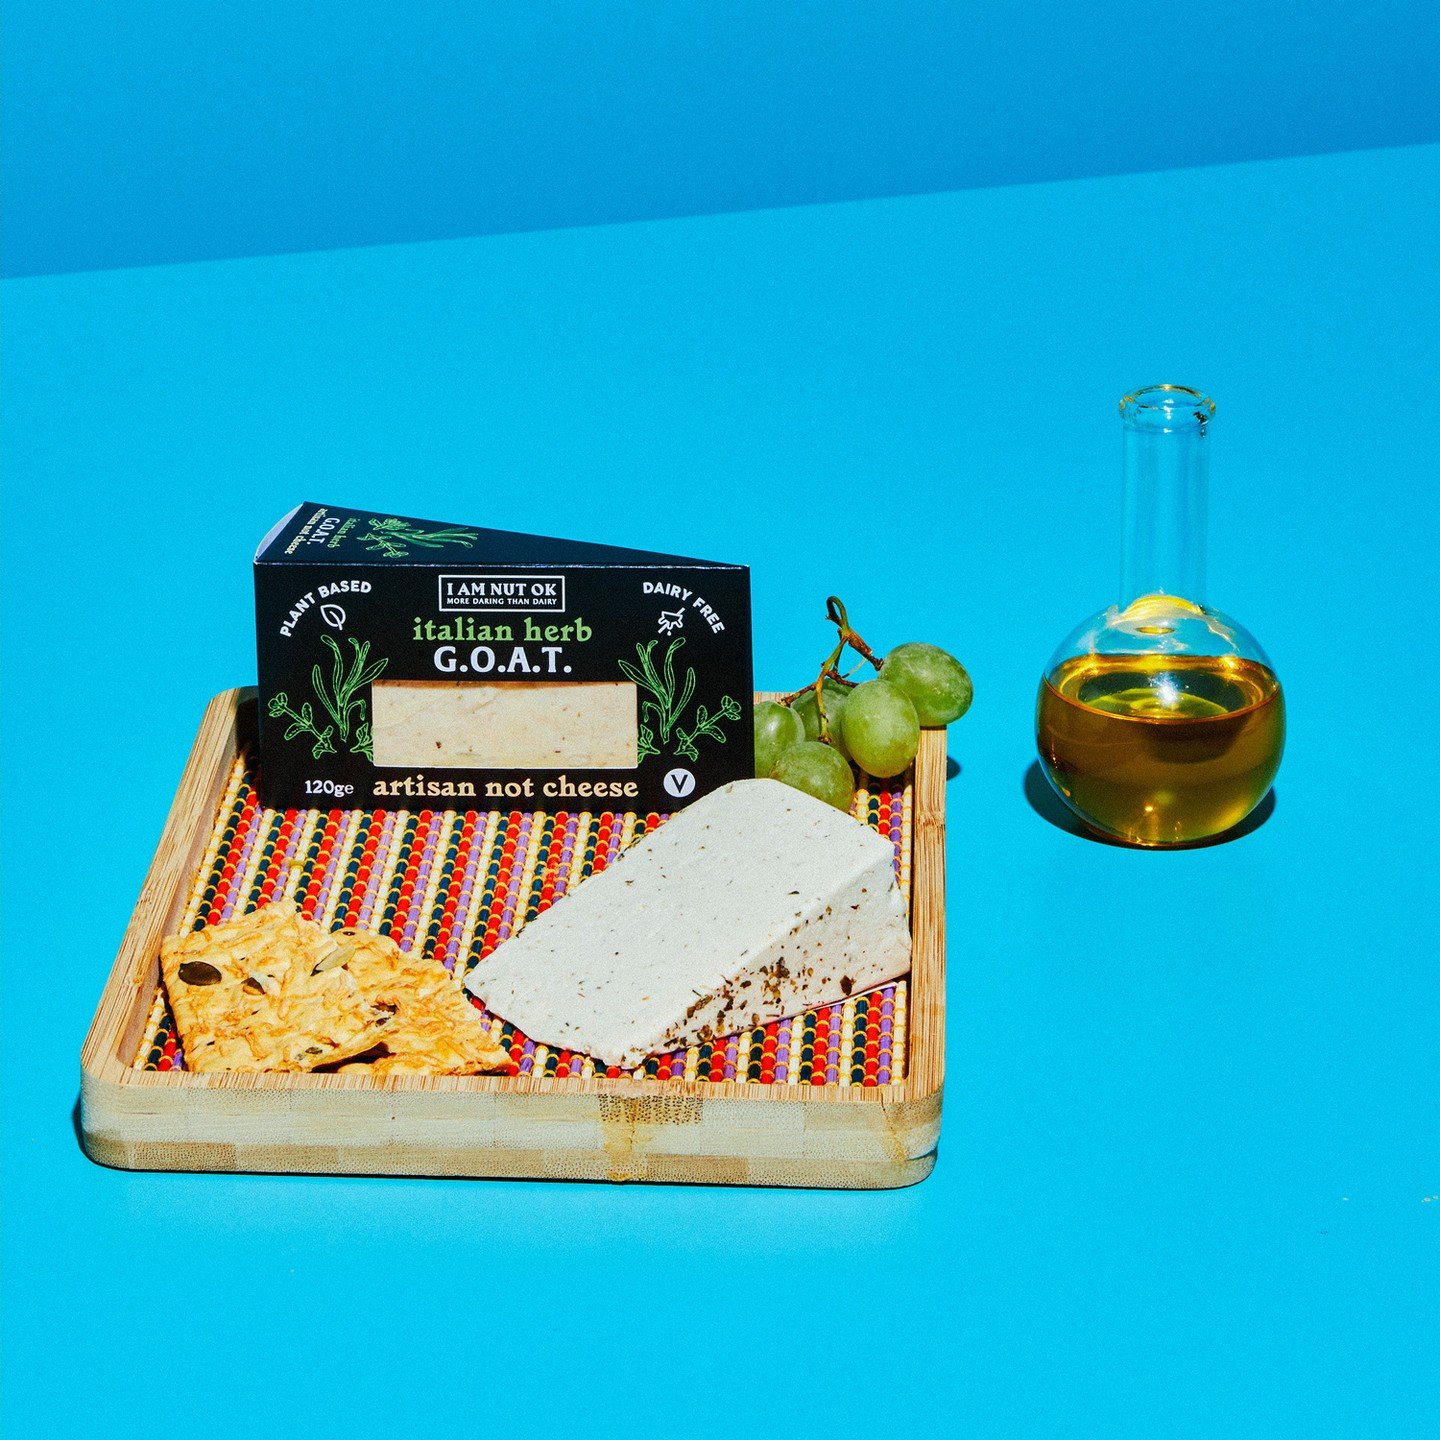 N E W - We have recently added the @iamnutok range to our vegan line up.

Using a mix of traditional and new techniques to create plant-based cheeses which are produced by hand in small batches. There 'not cheeses' go through a process of fermentatio